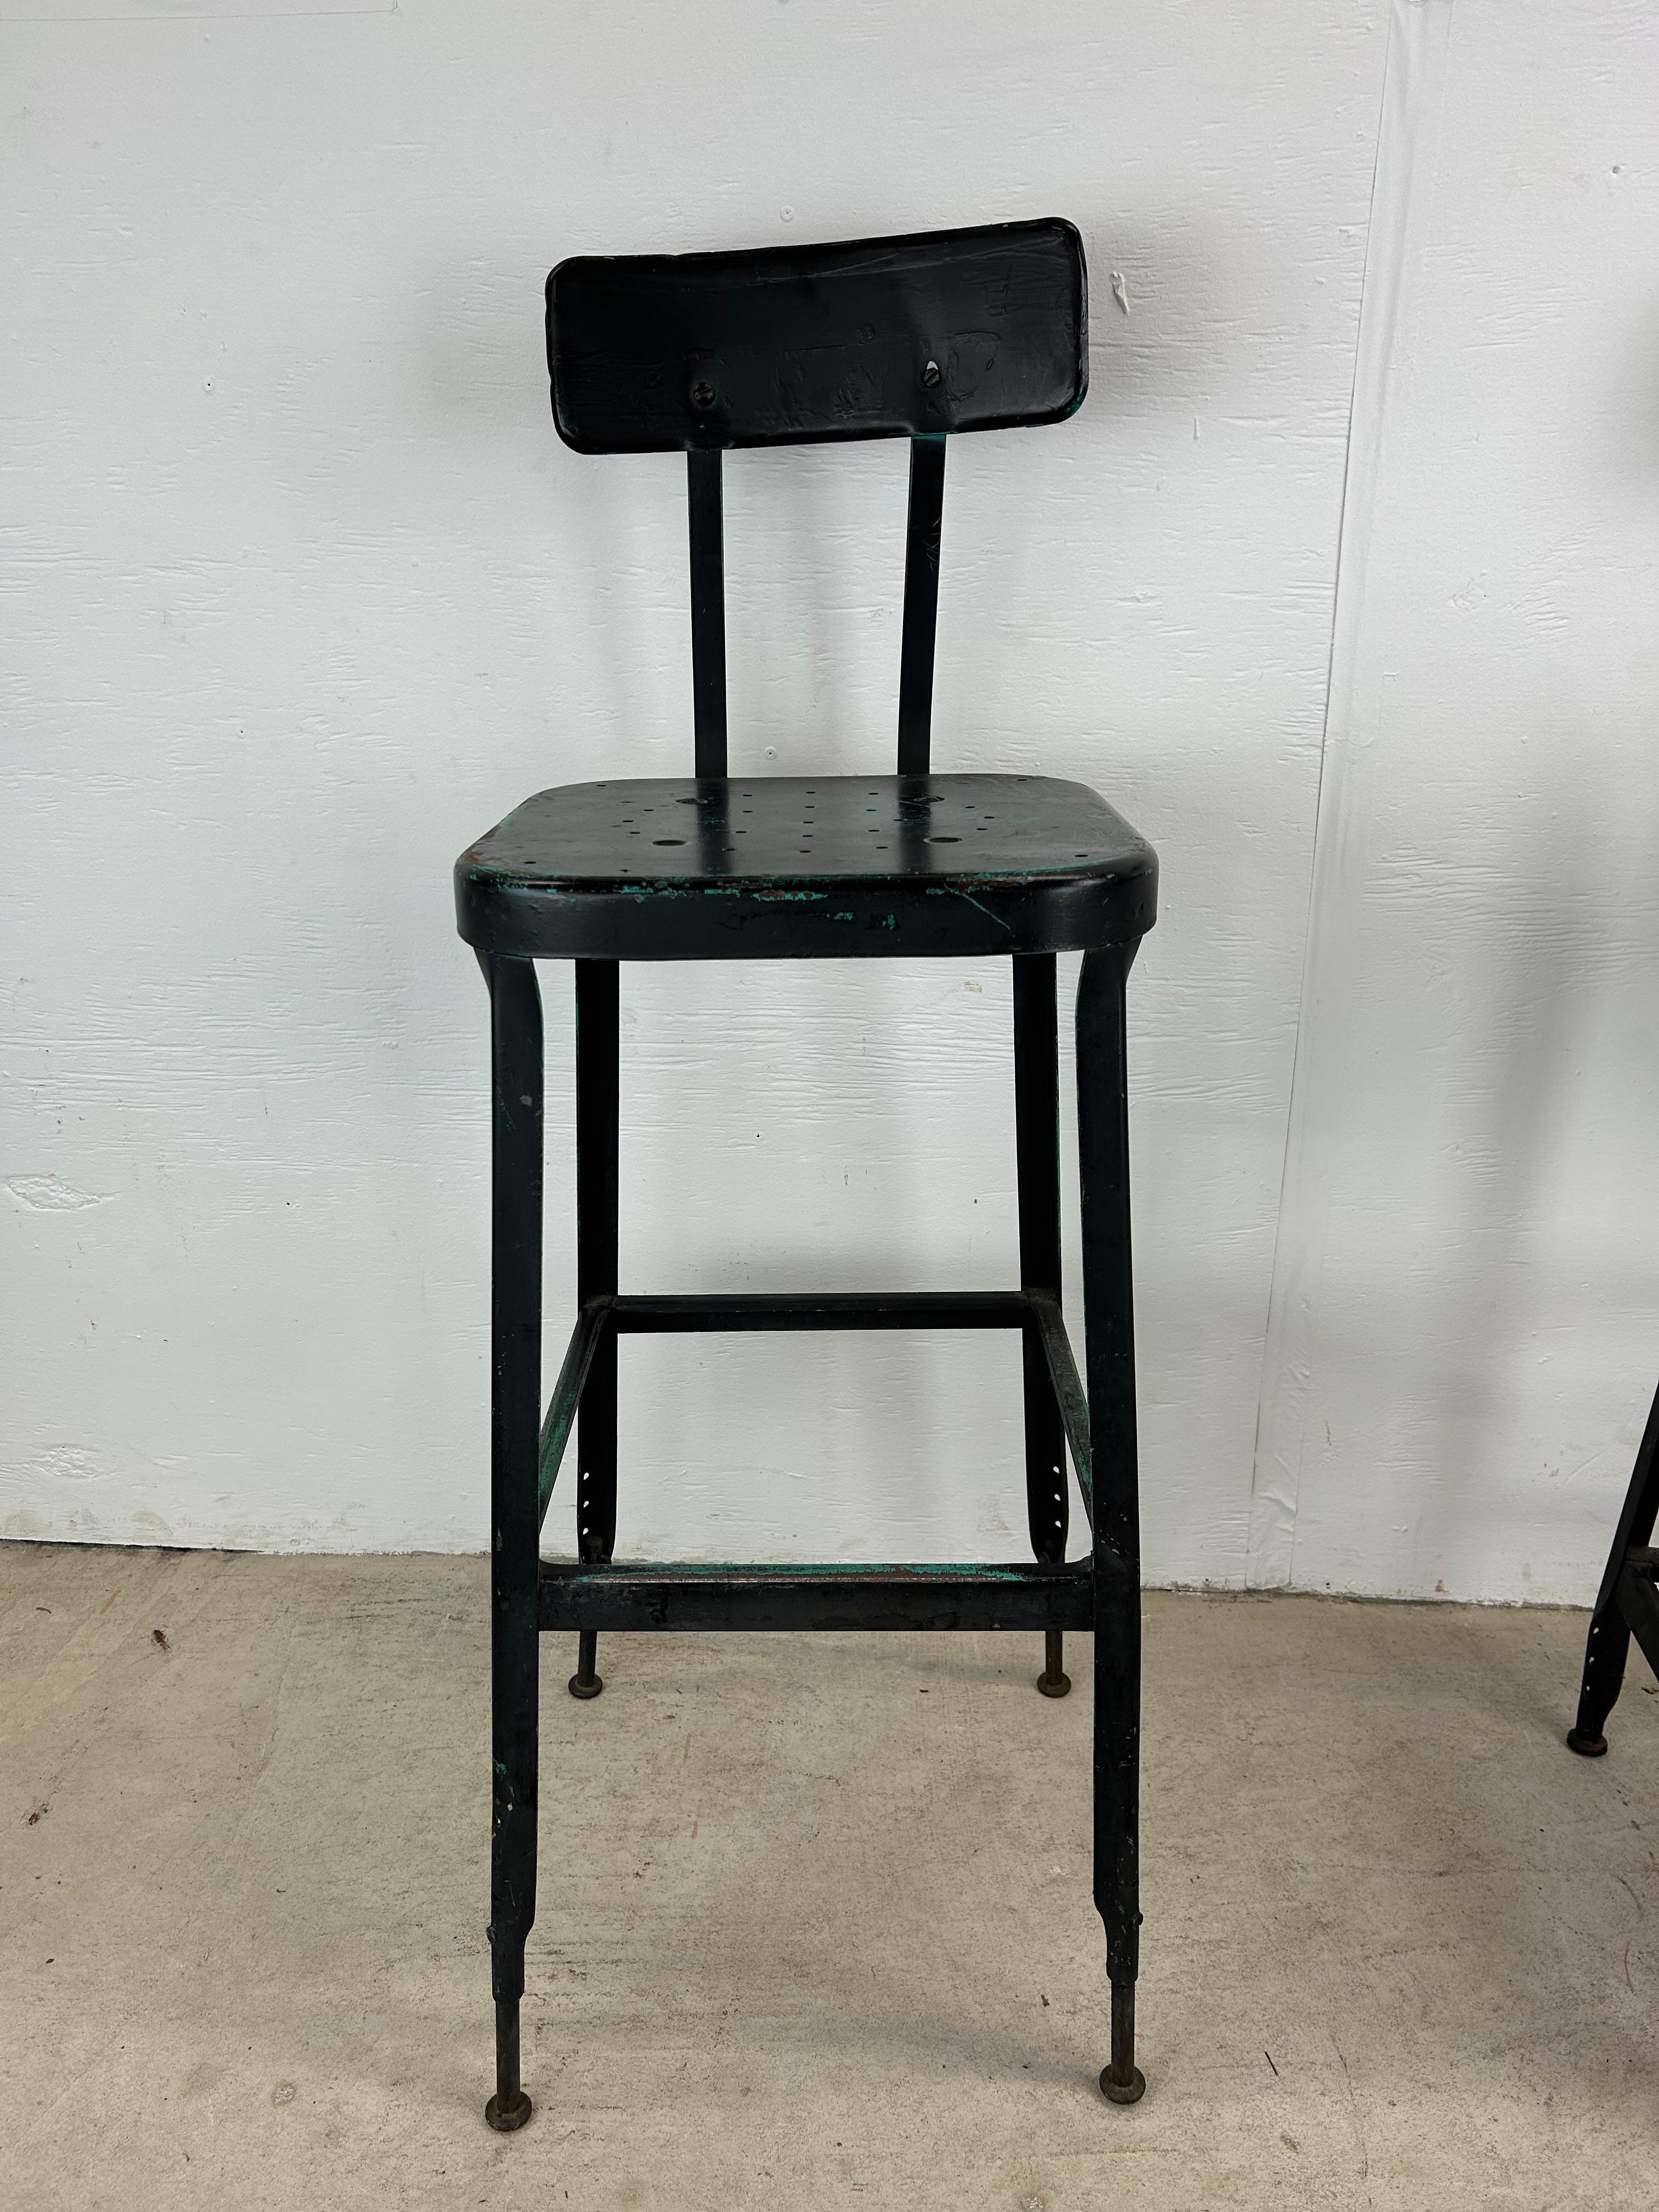 This pair of vintage industrial stools feature metal frame & seat back, unique patina caused by painting black over red & aqua colors, and tall tapered legs.

Complimentary kitchen cart / table available separately. 

Dimensions: 15.5w 15.5d 41.5h